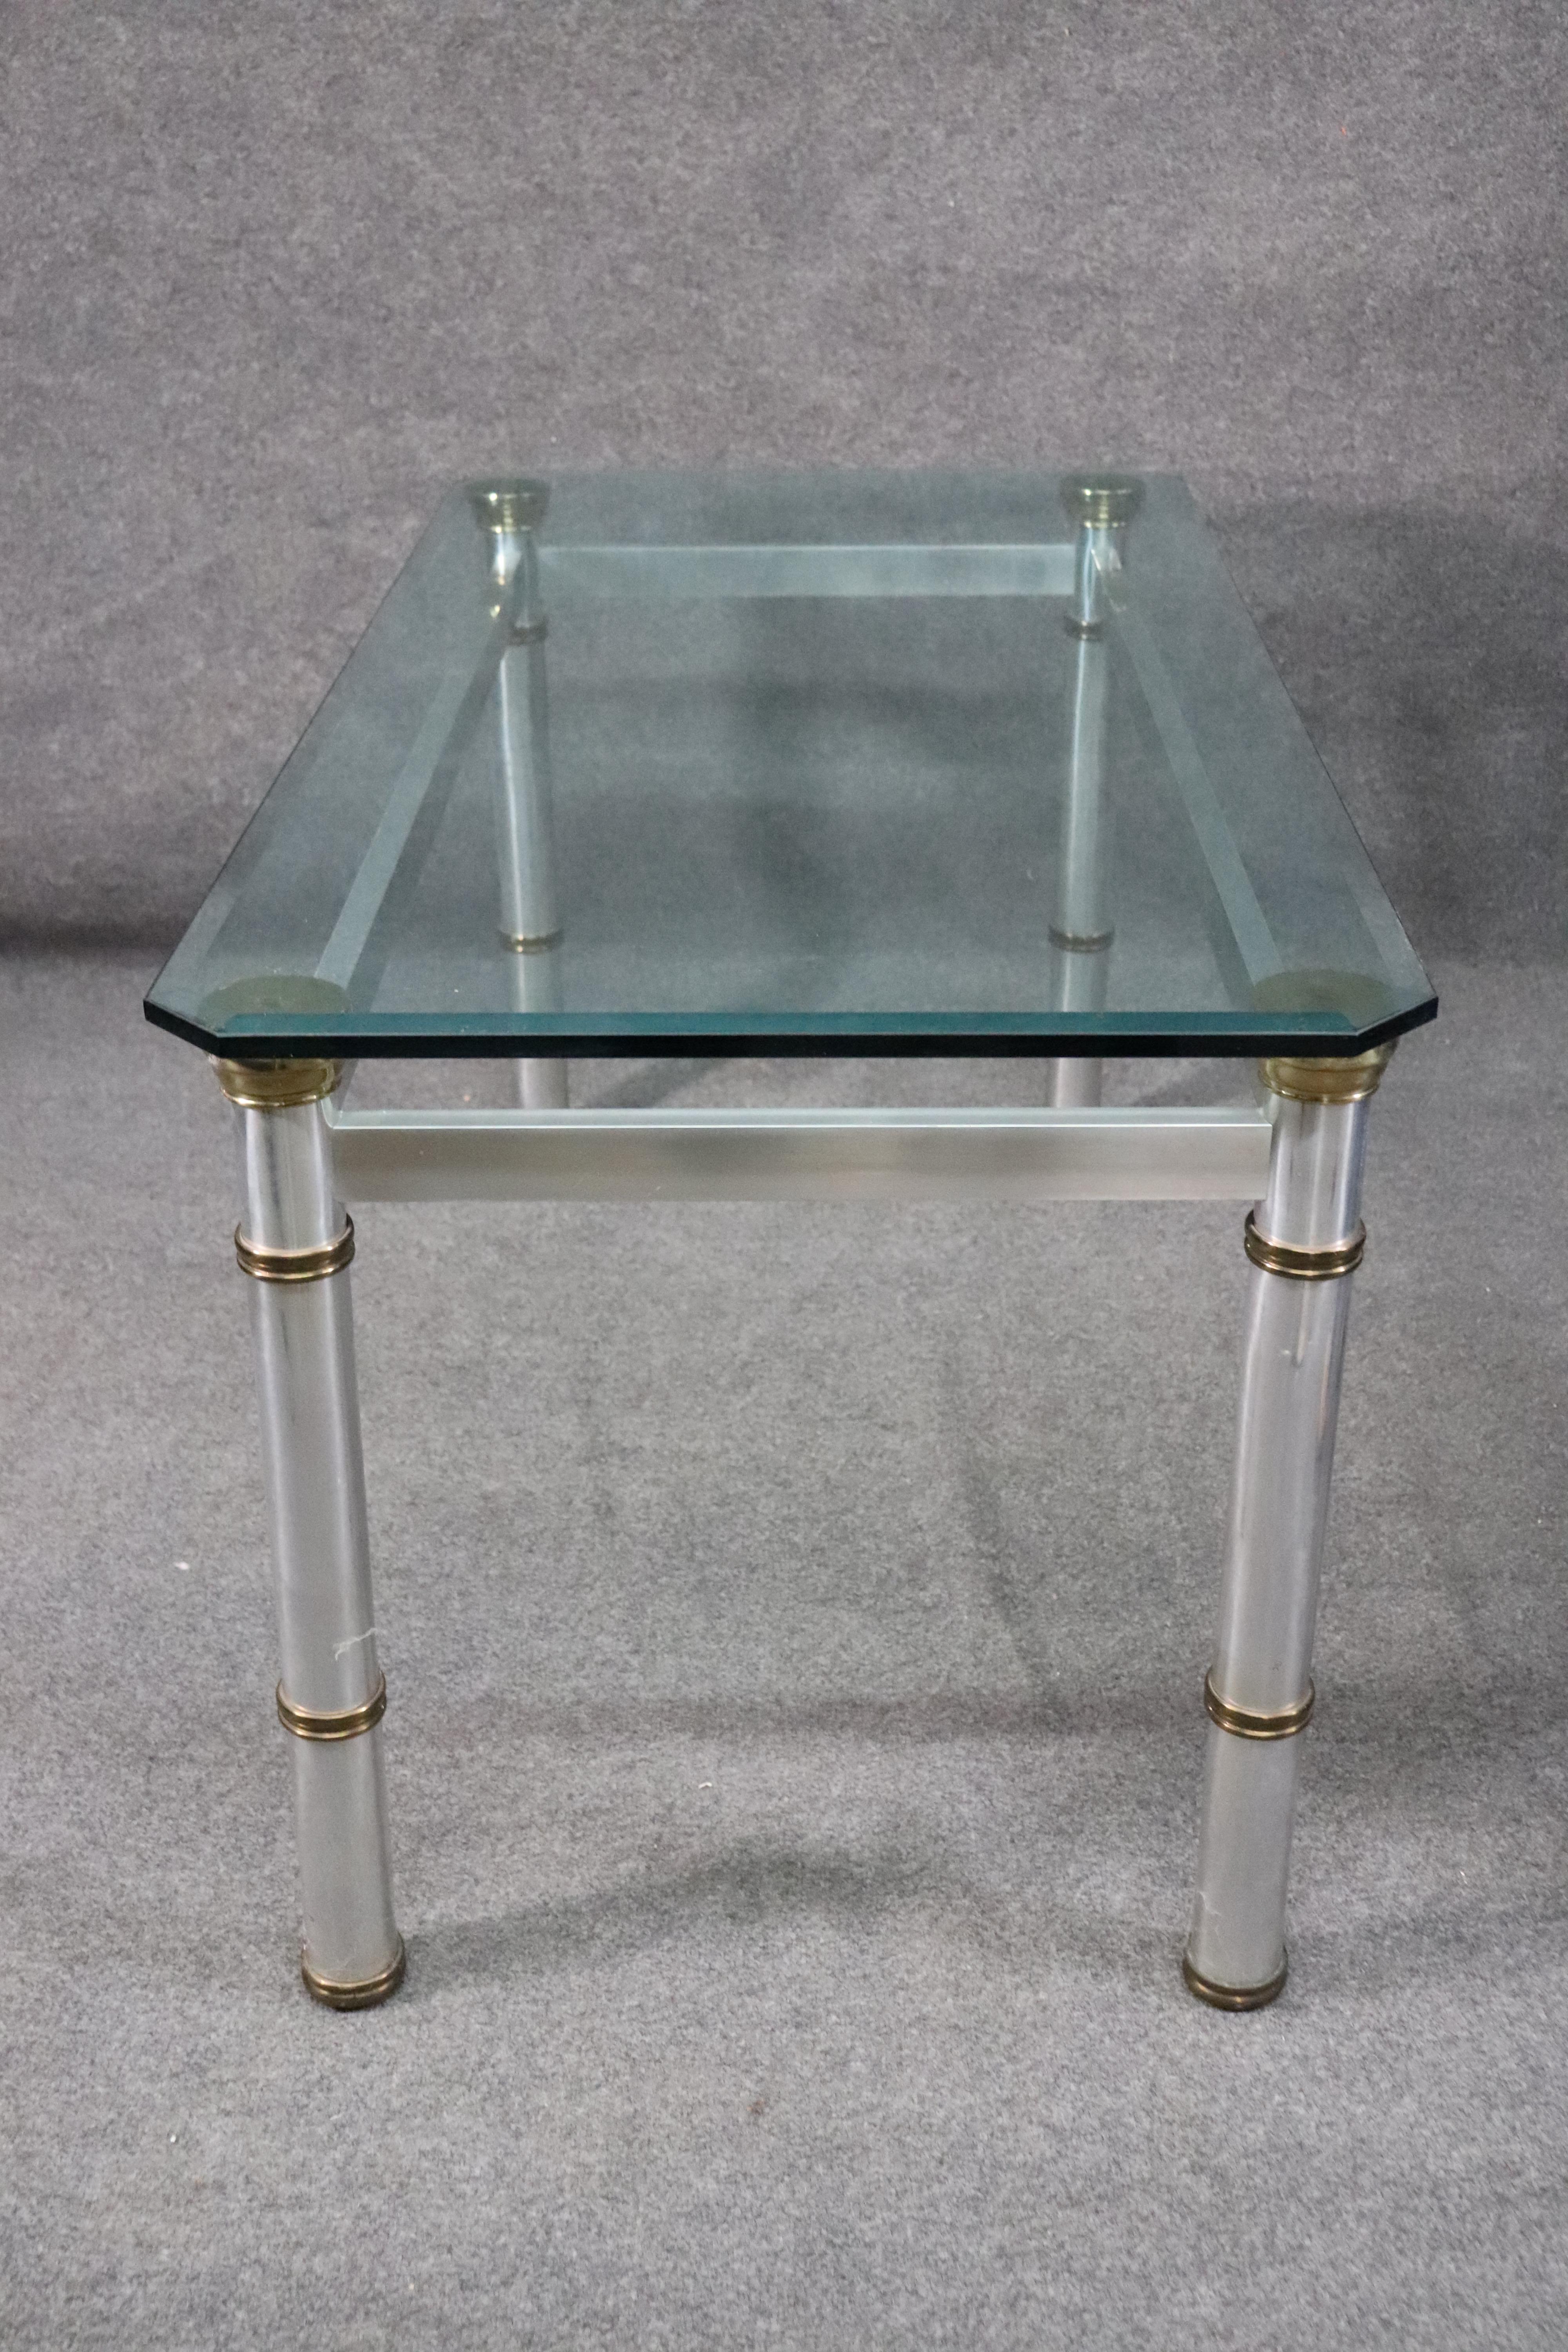 Attributed John Vesey Brass and Glass Metal Dining Table with Beveled Glass Top In Good Condition For Sale In Swedesboro, NJ